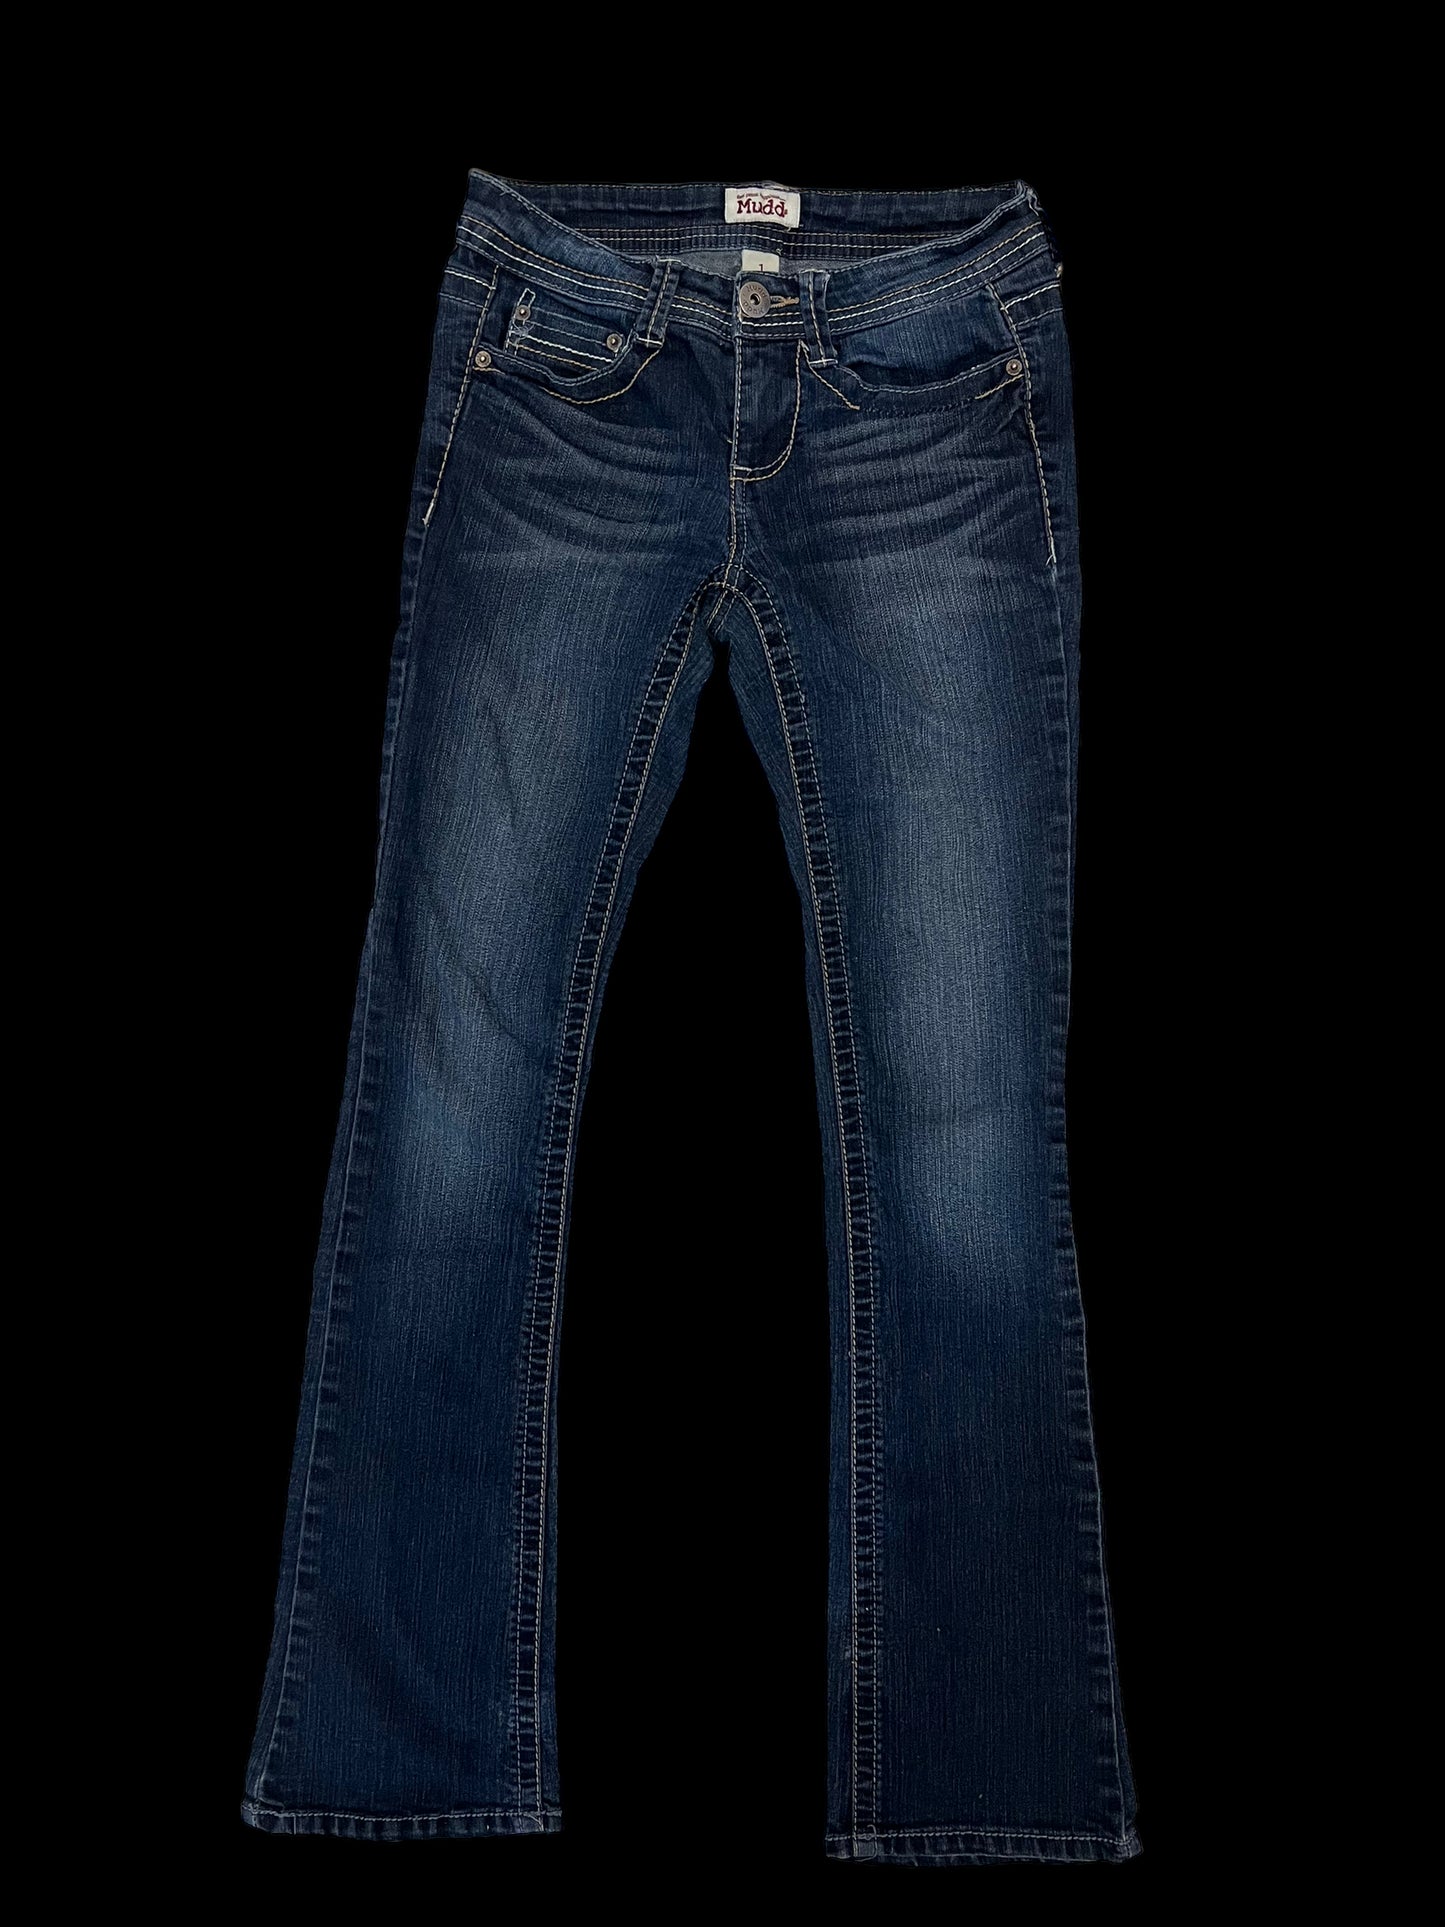 Mudd low-rise jeans